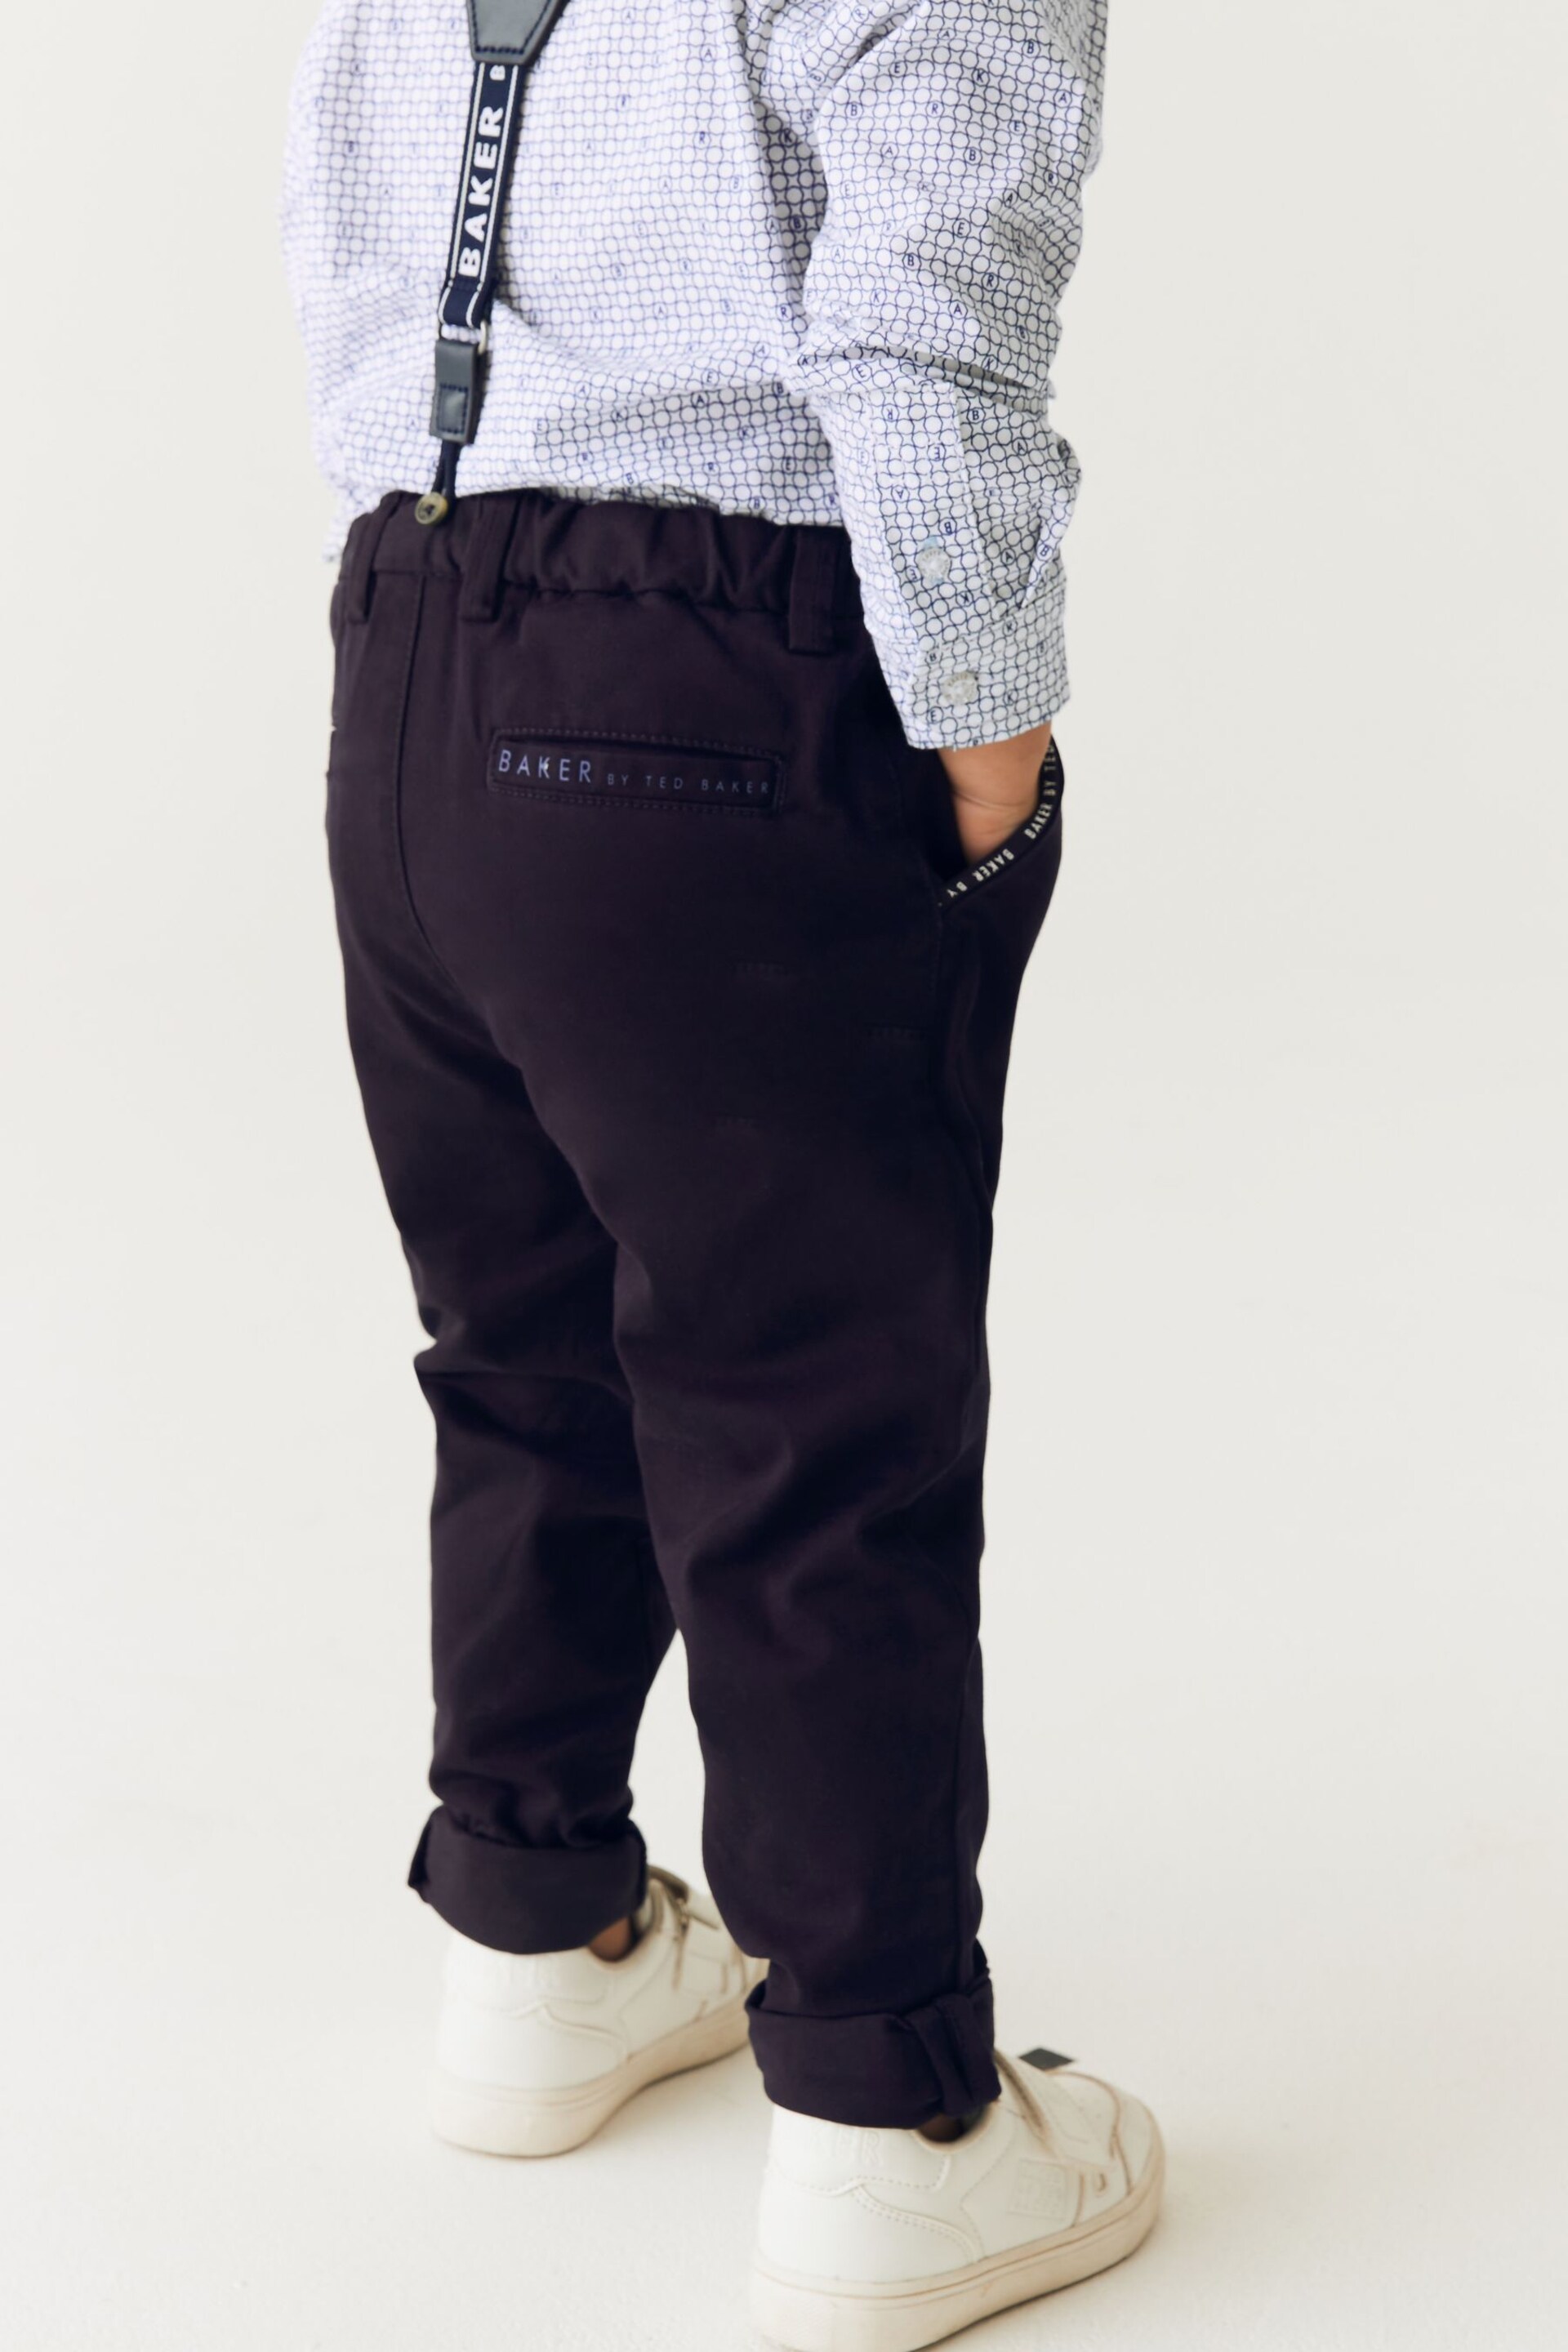 Baker by Ted Baker (3mths-6yrs) Shirt, Braces and Chino Set - Image 8 of 14